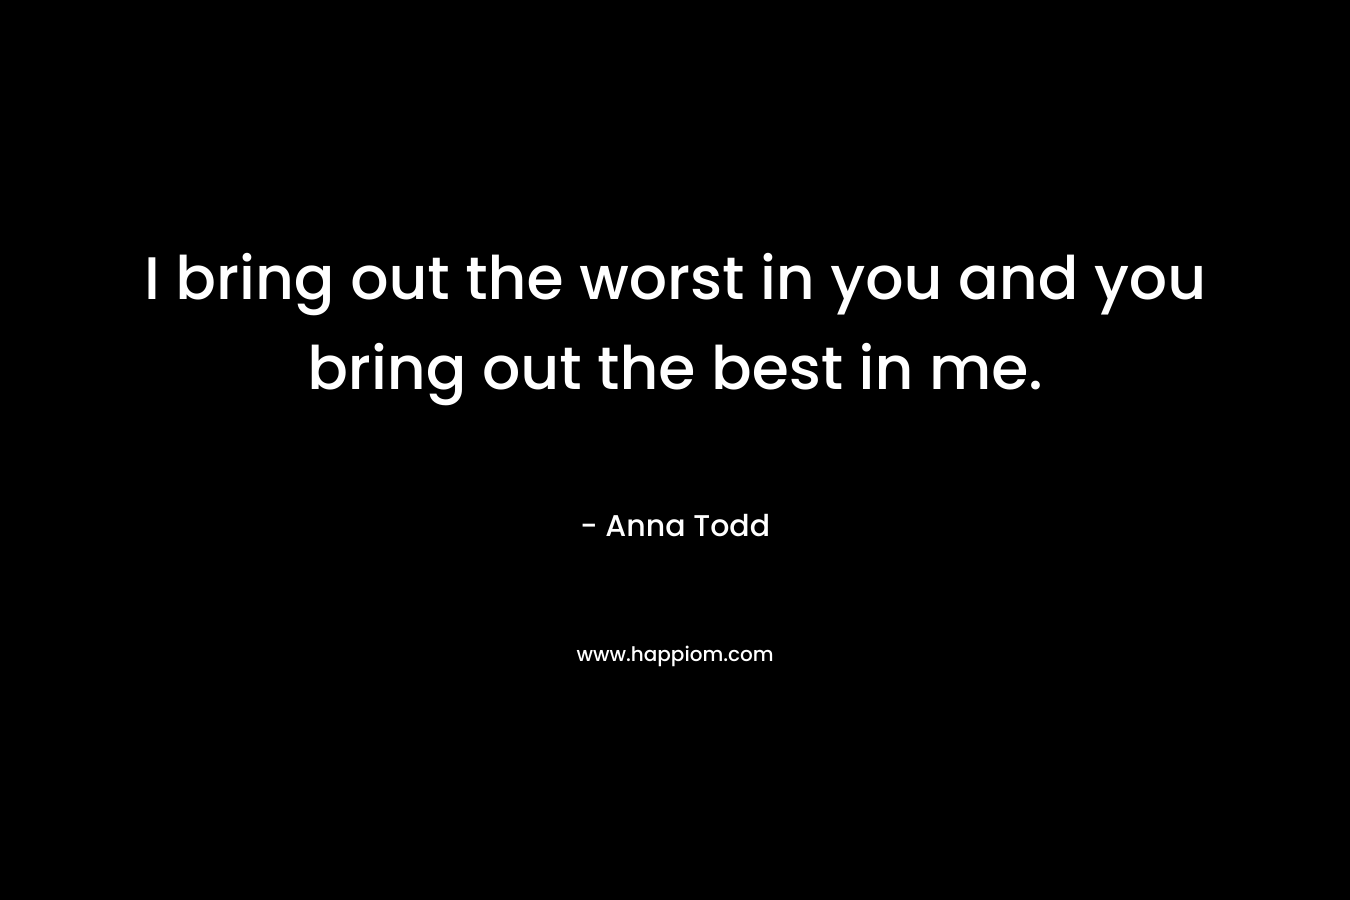 I bring out the worst in you and you bring out the best in me. – Anna Todd